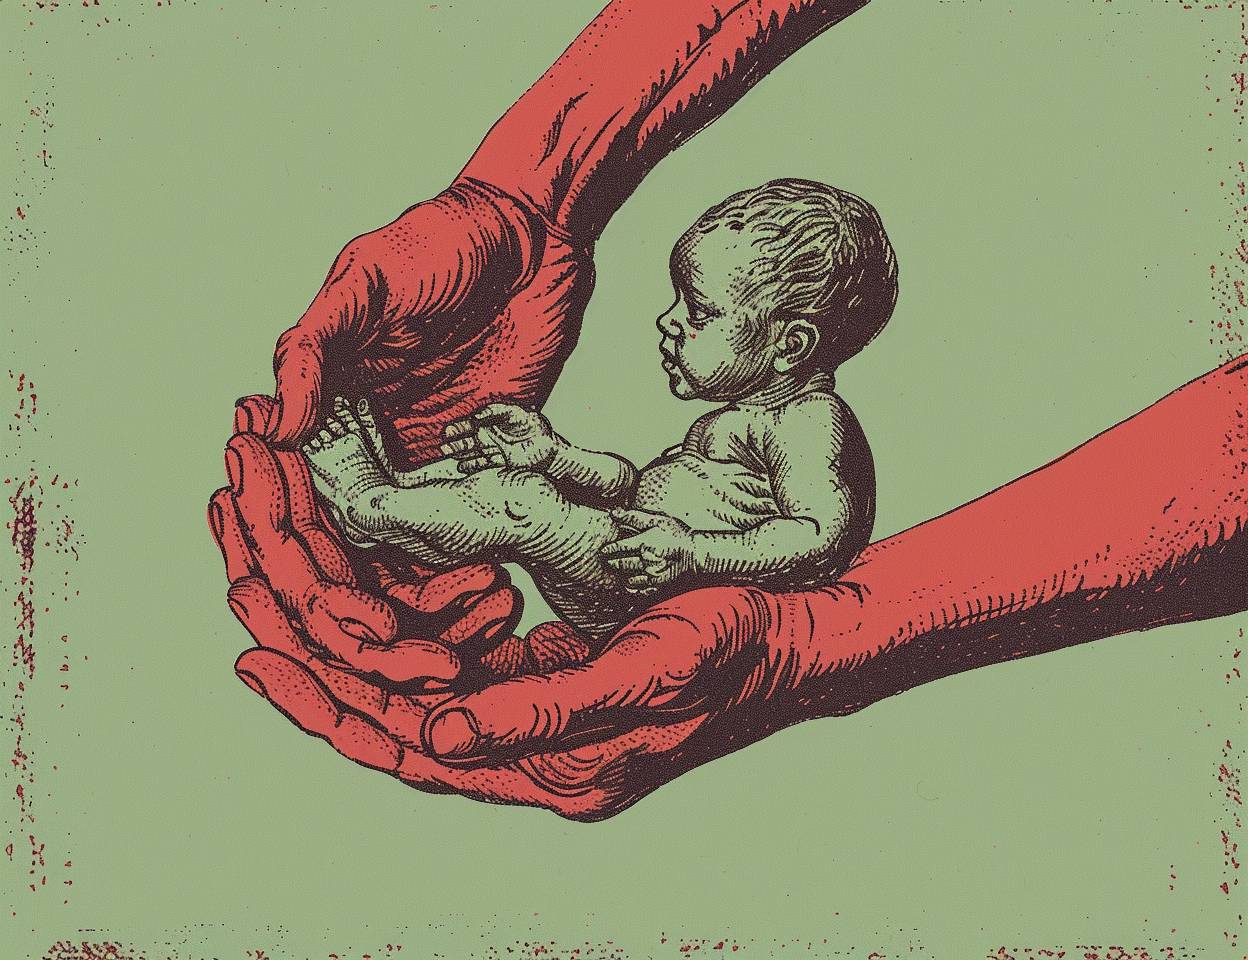 A comic panel of an early human baby inside a hand, drawn in ink and pen style in the style of R Crumb with deep red colors on a light green background. The character is depicted as if it were drawing from life, with no facial features or body proportions. It's a close-up shot focusing only on one arm holding the little boy inside his palm.